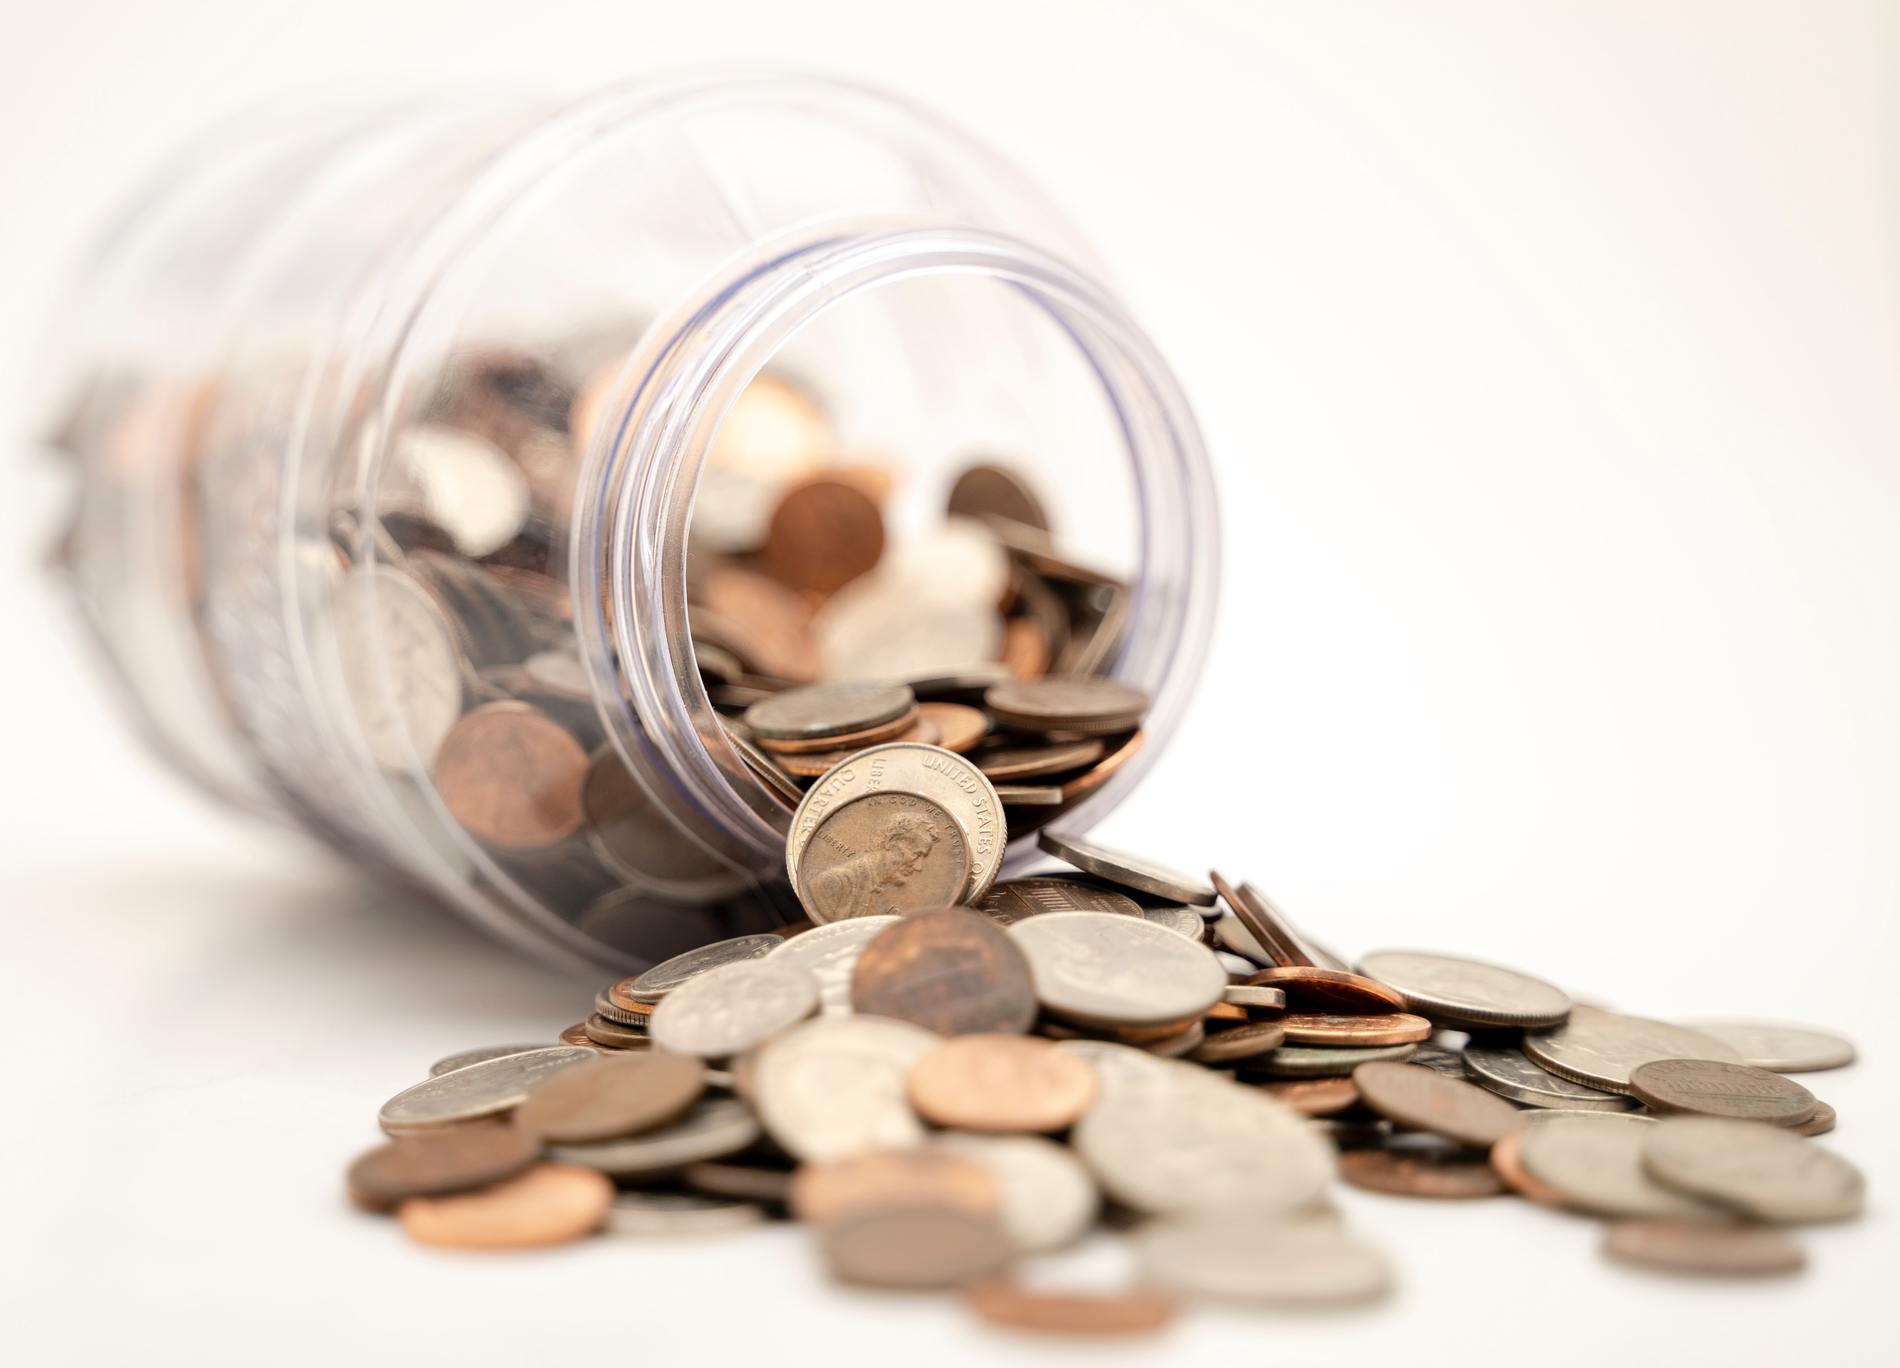 Change jar with nickels and pennies